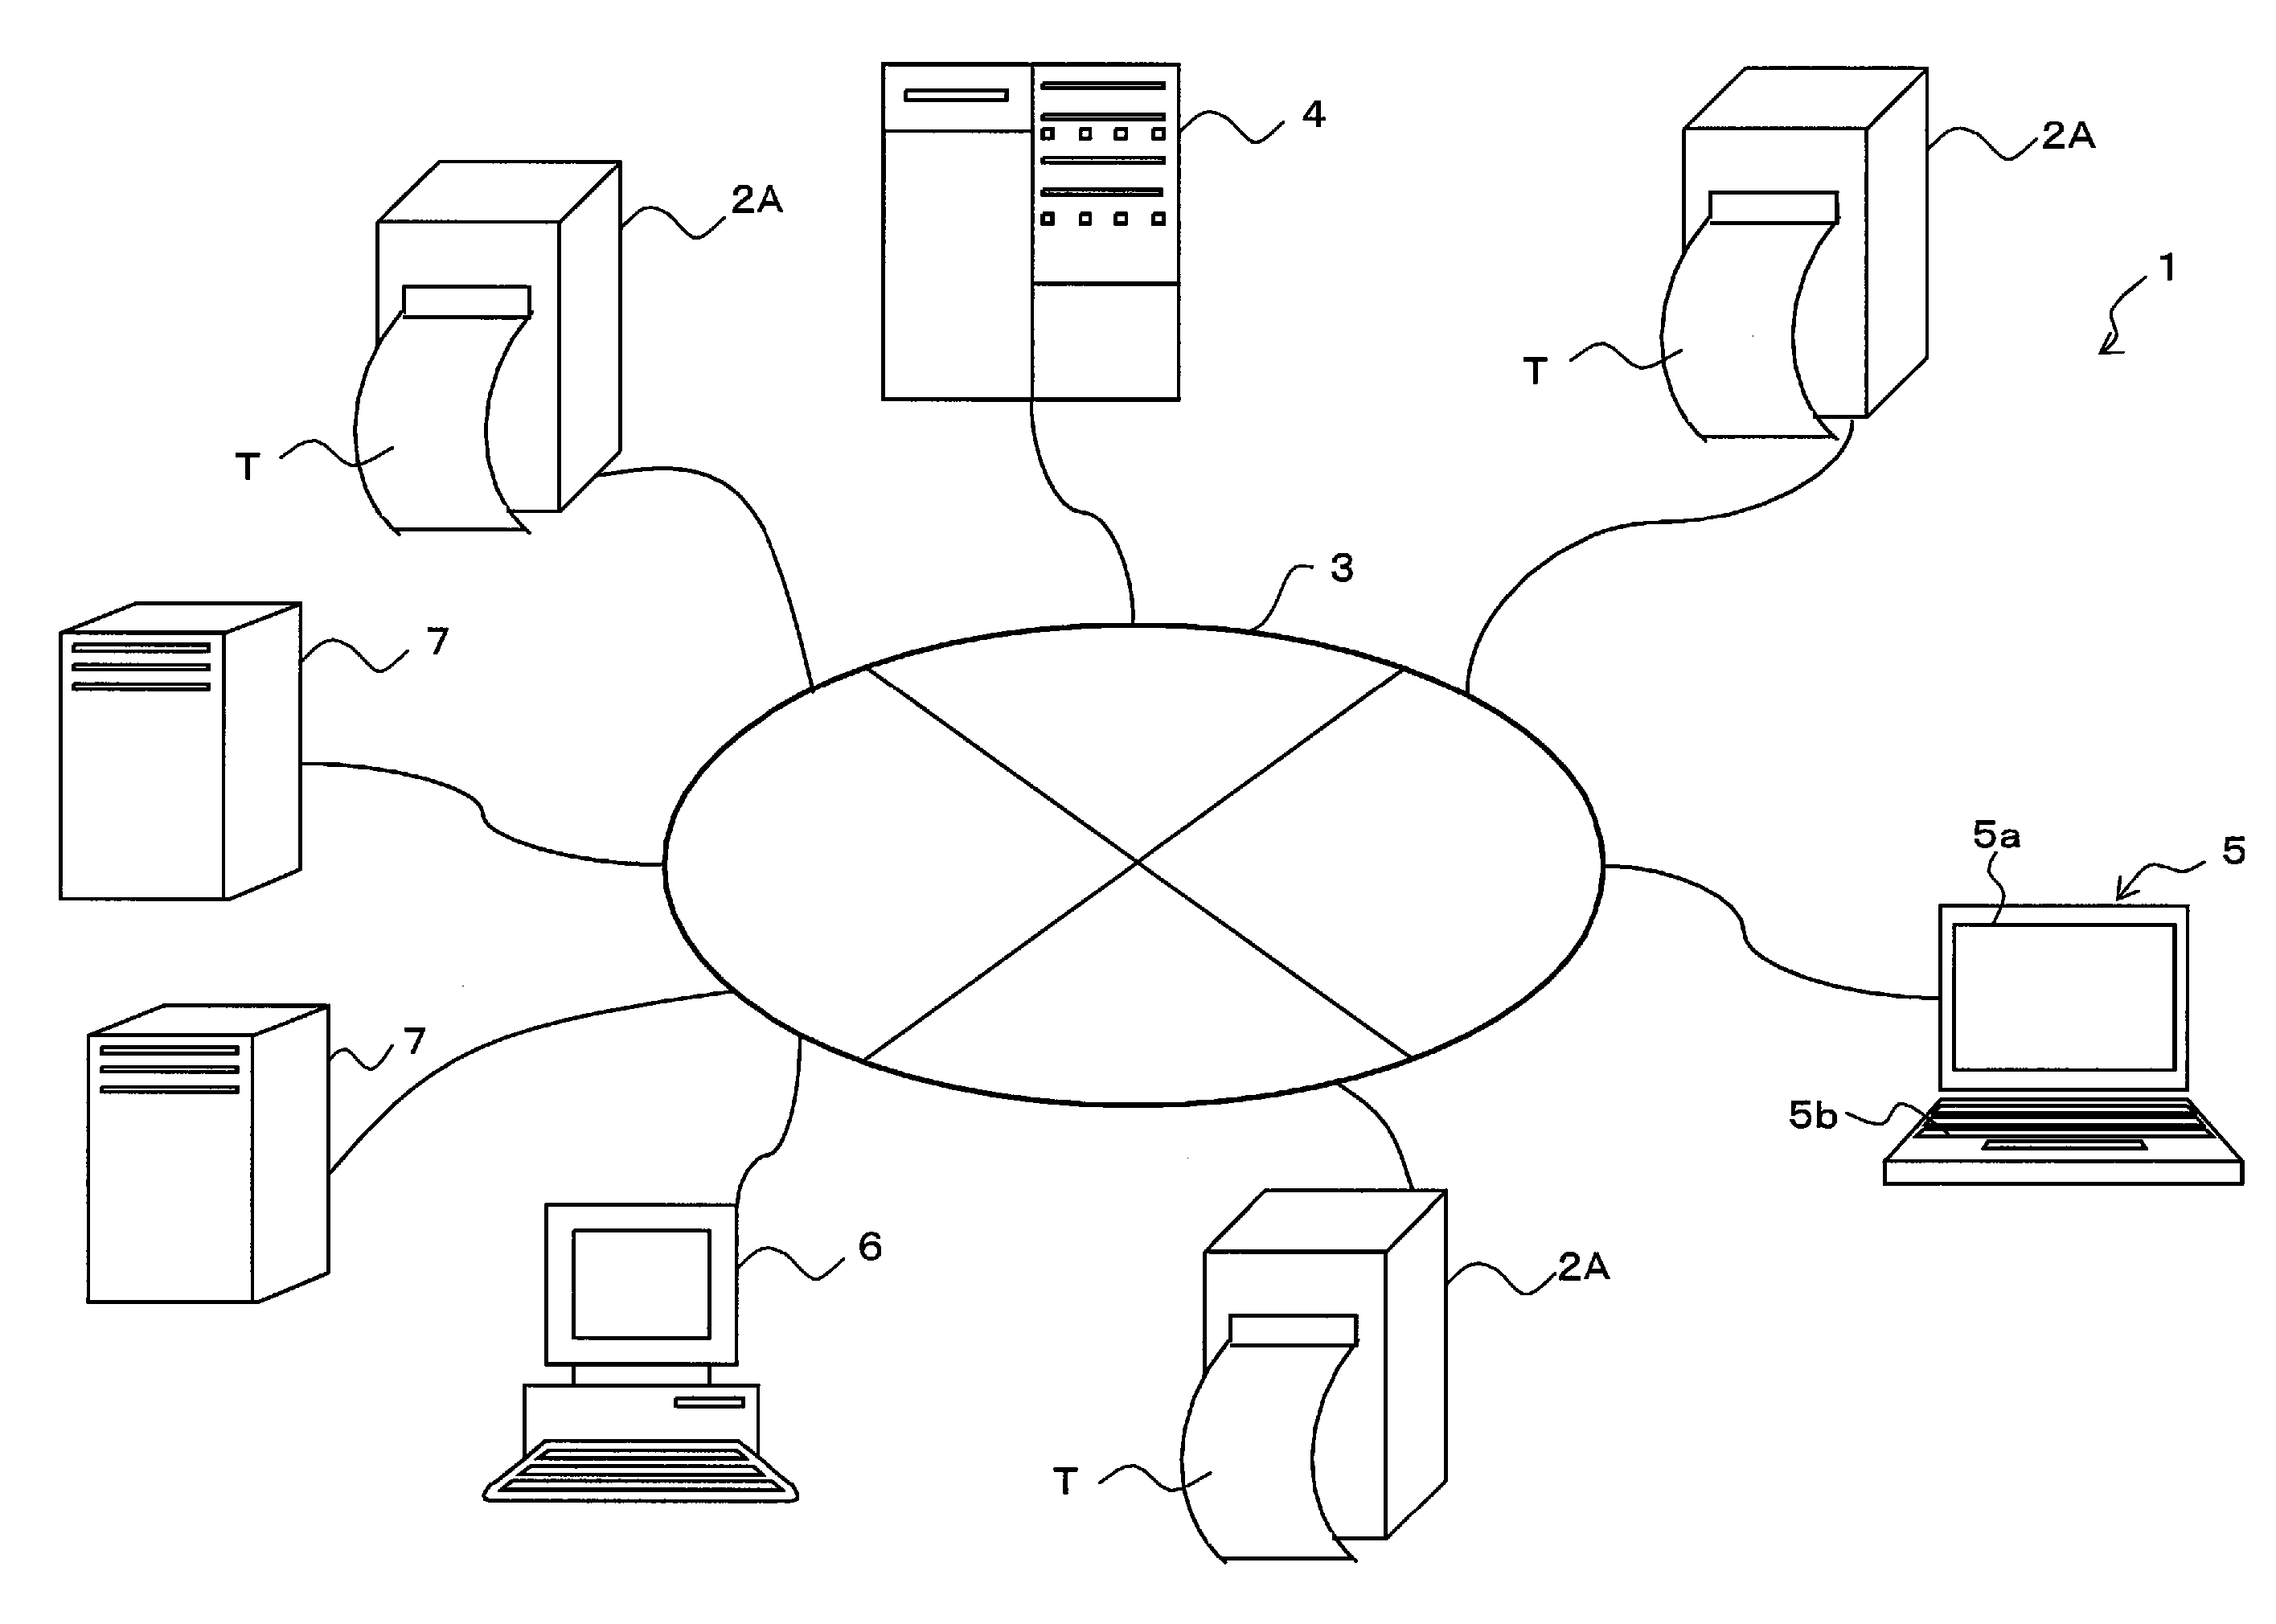 System For Managing Information Of A RFID Tag, Appratus For Communicating With A RFID Tag, Reader For Communicating With A RFID Tag, Cartridge For Including At Least A RFID Tag, And RFID Tag